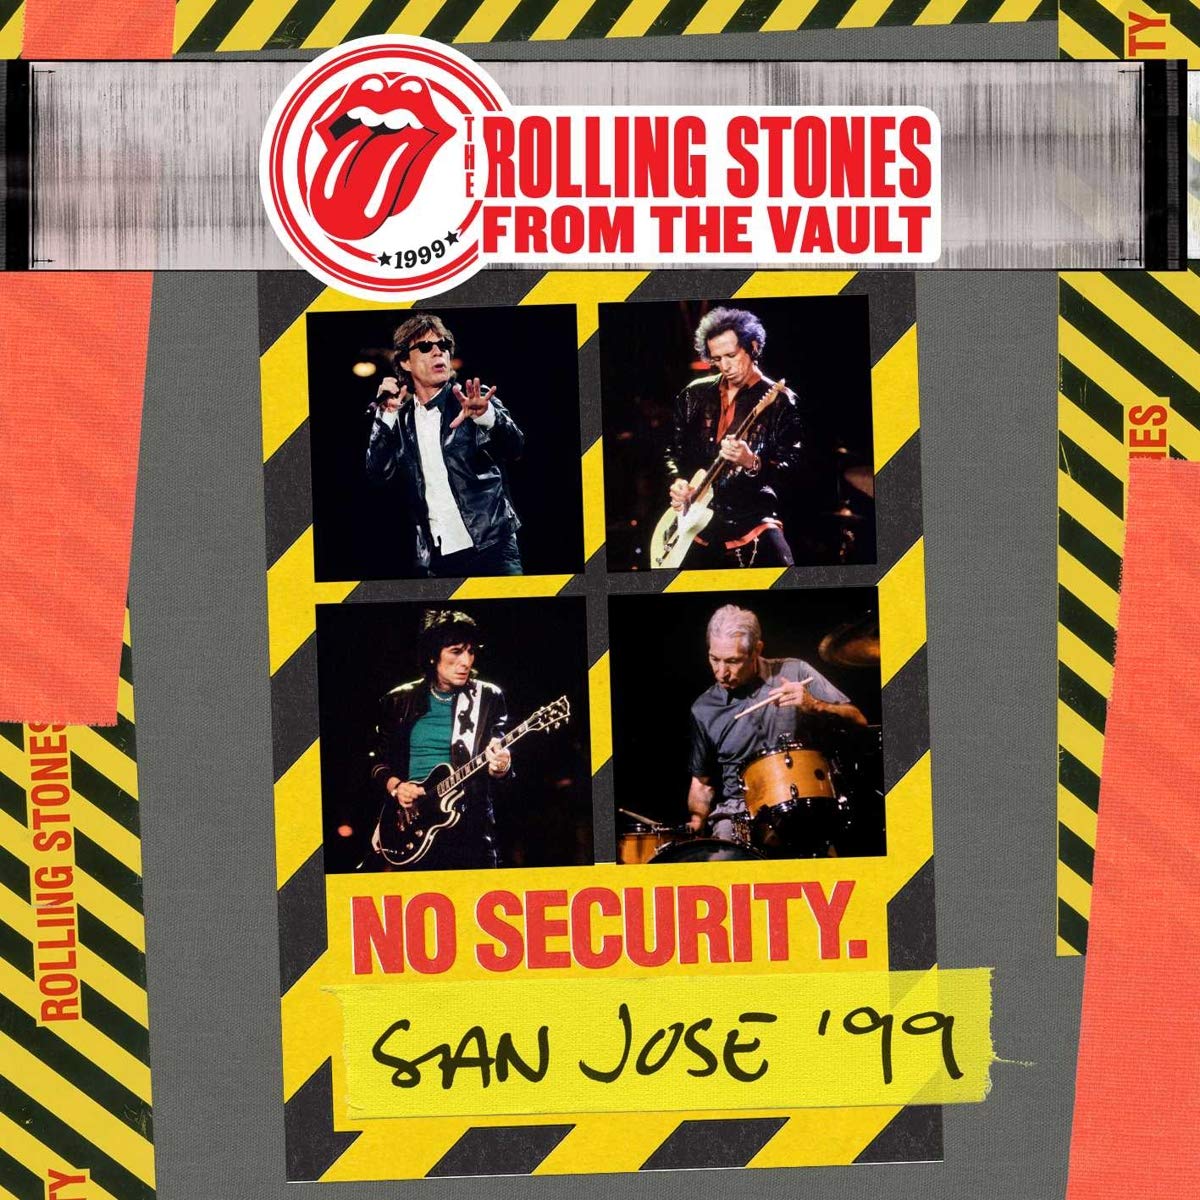 From The Vault: No Security, San Jose ’99 (DVD + 2CD) on MovieShack